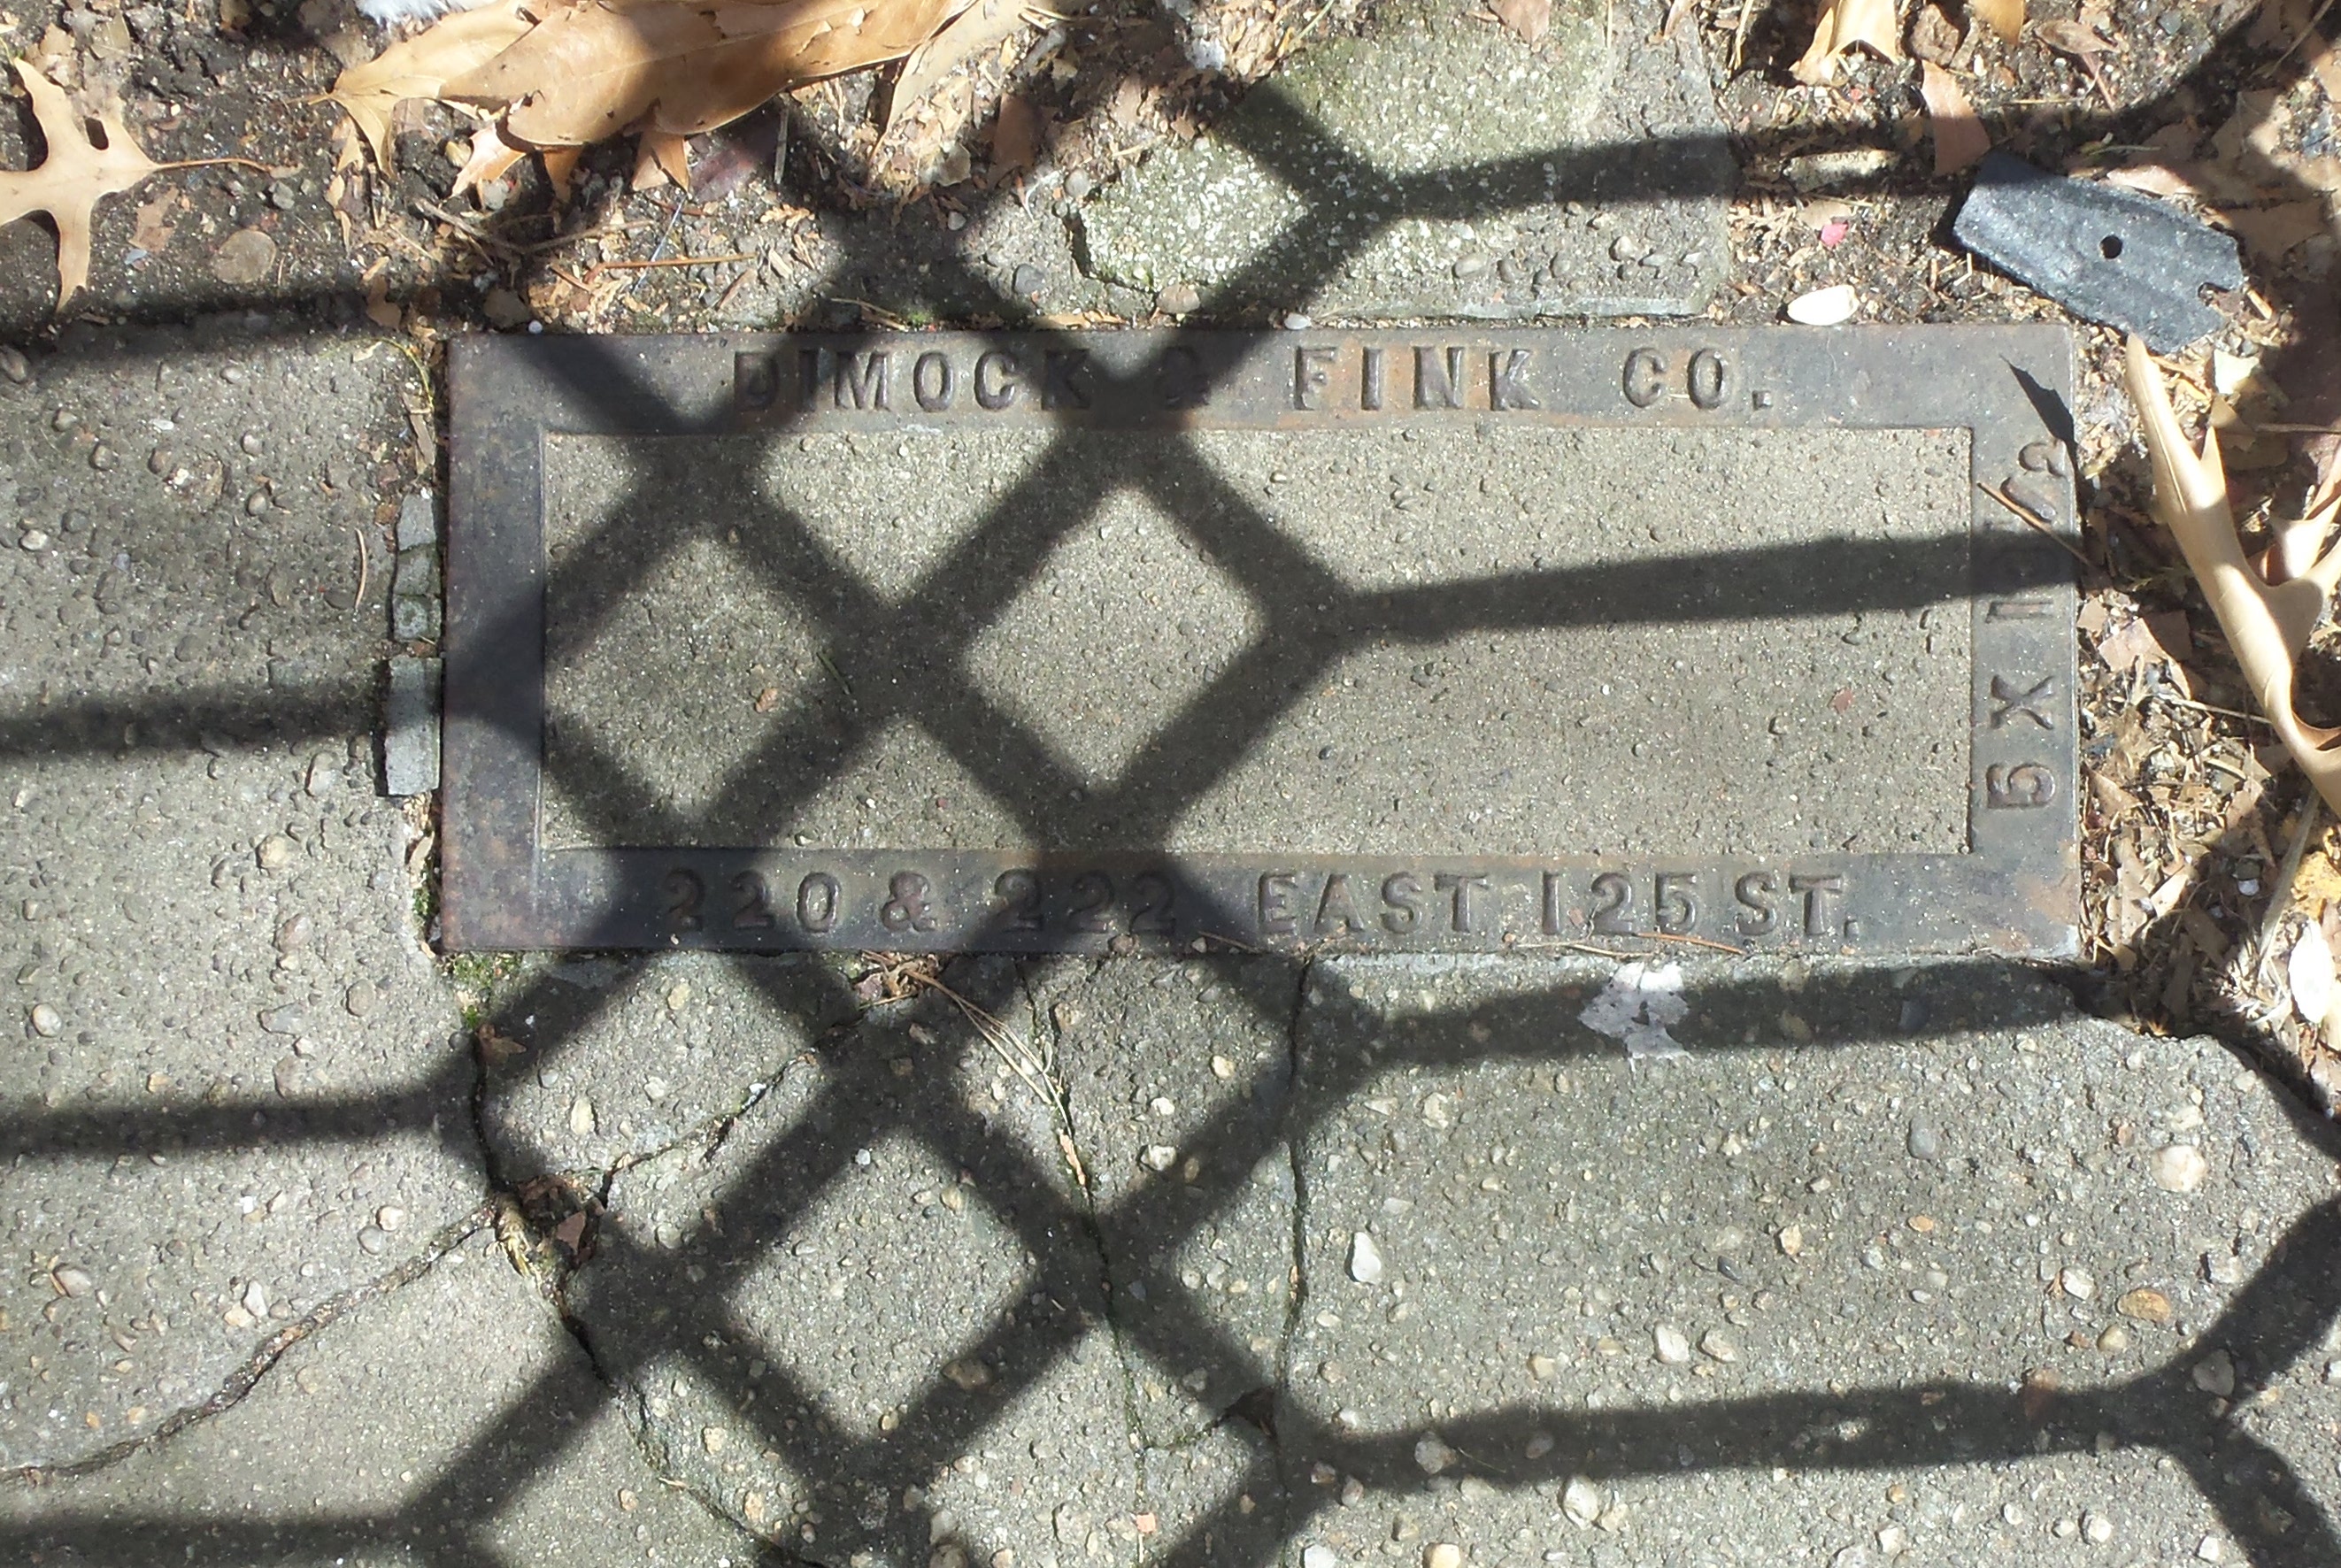 Dimock & Fink building drain cover